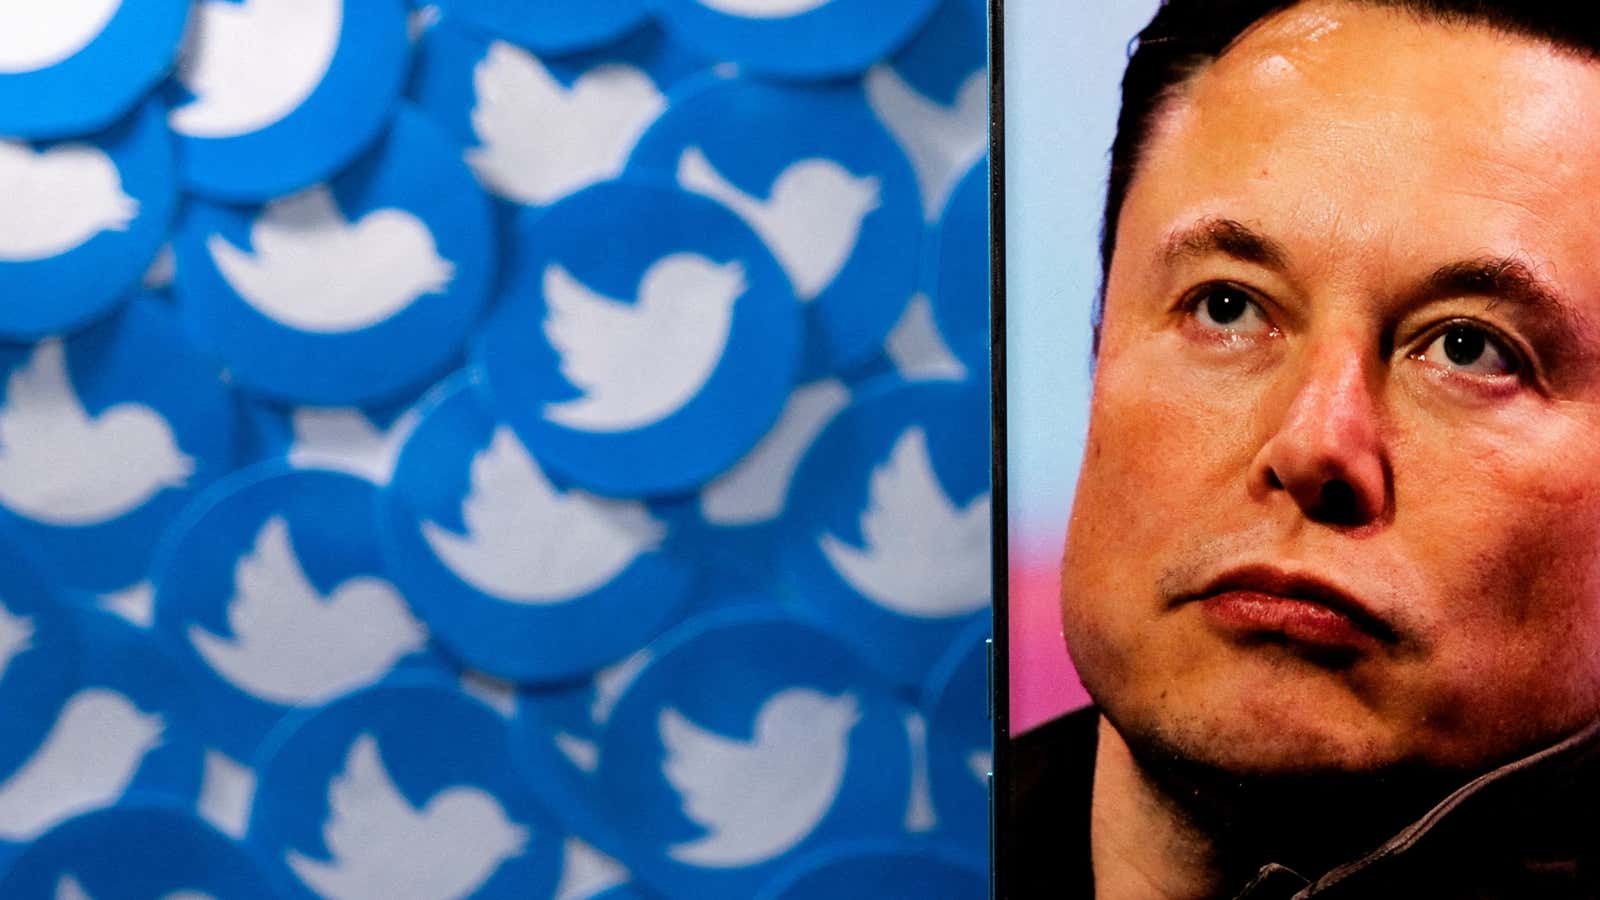 Elon Musk is buying Twitter for $44 billion. How did he get here?